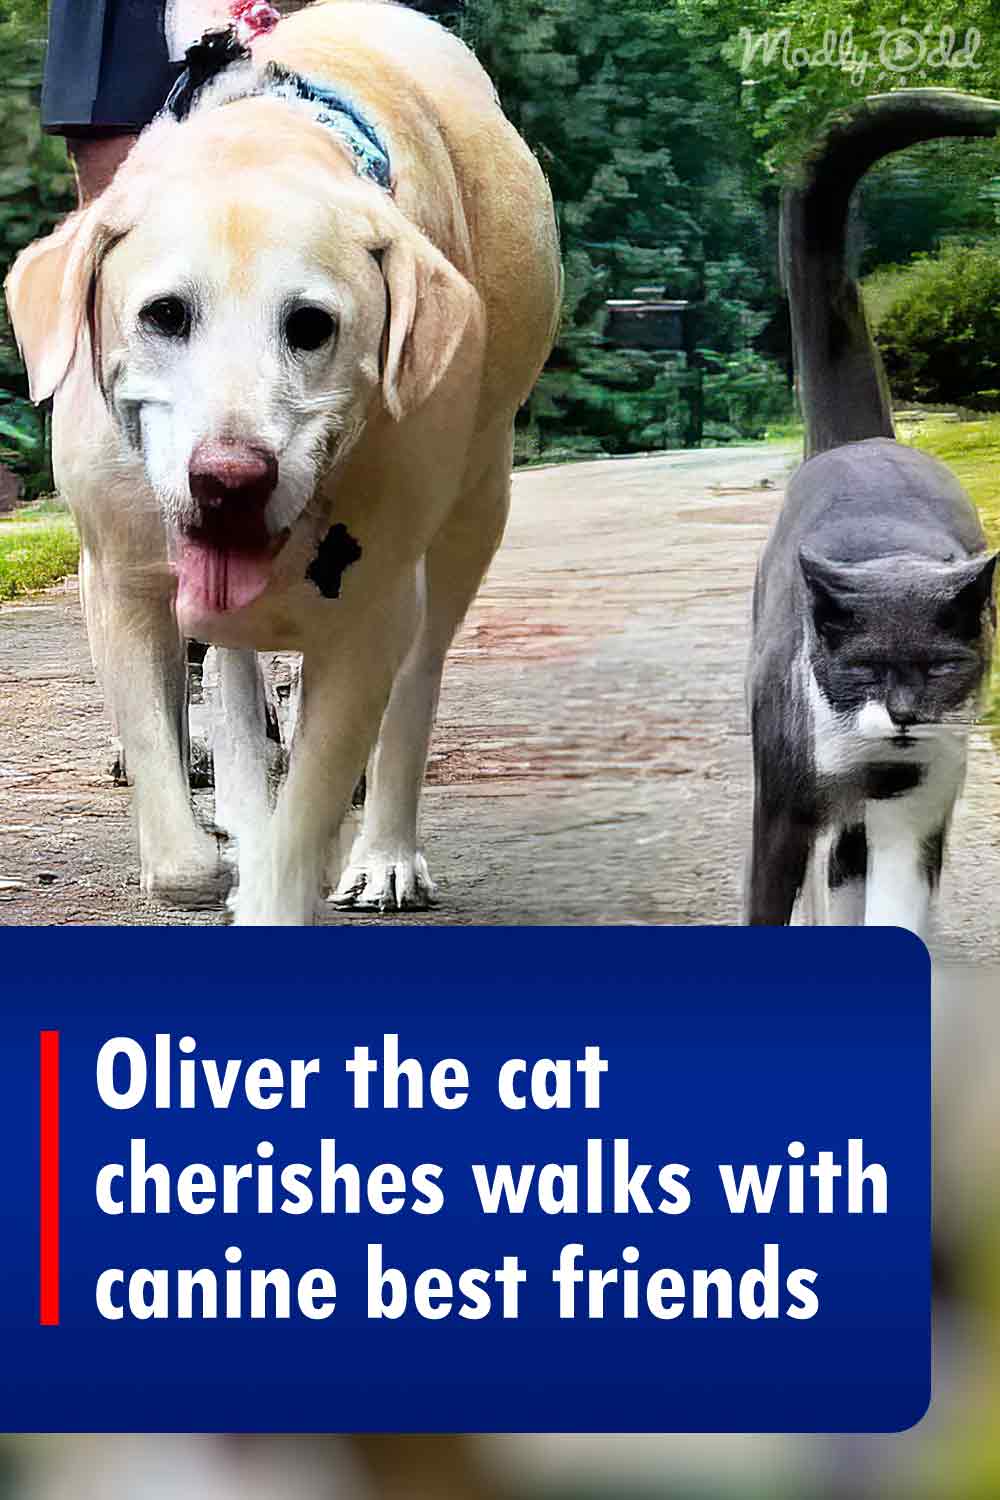 Oliver the cat cherishes walks with canine best friends